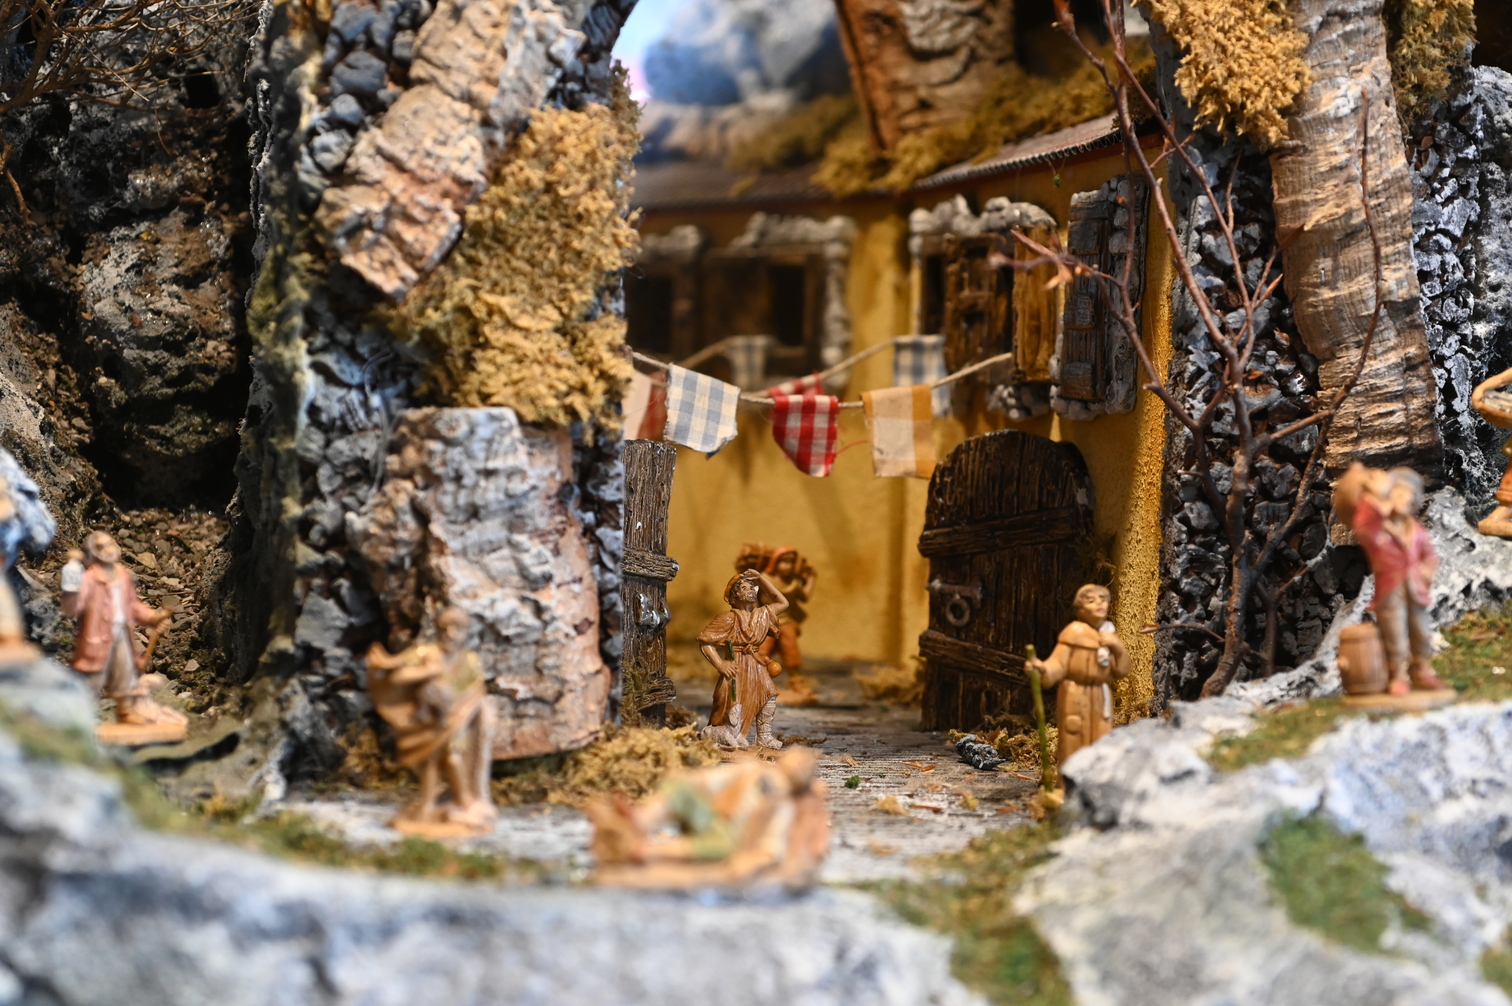 Nativity scenes on display in Lucca